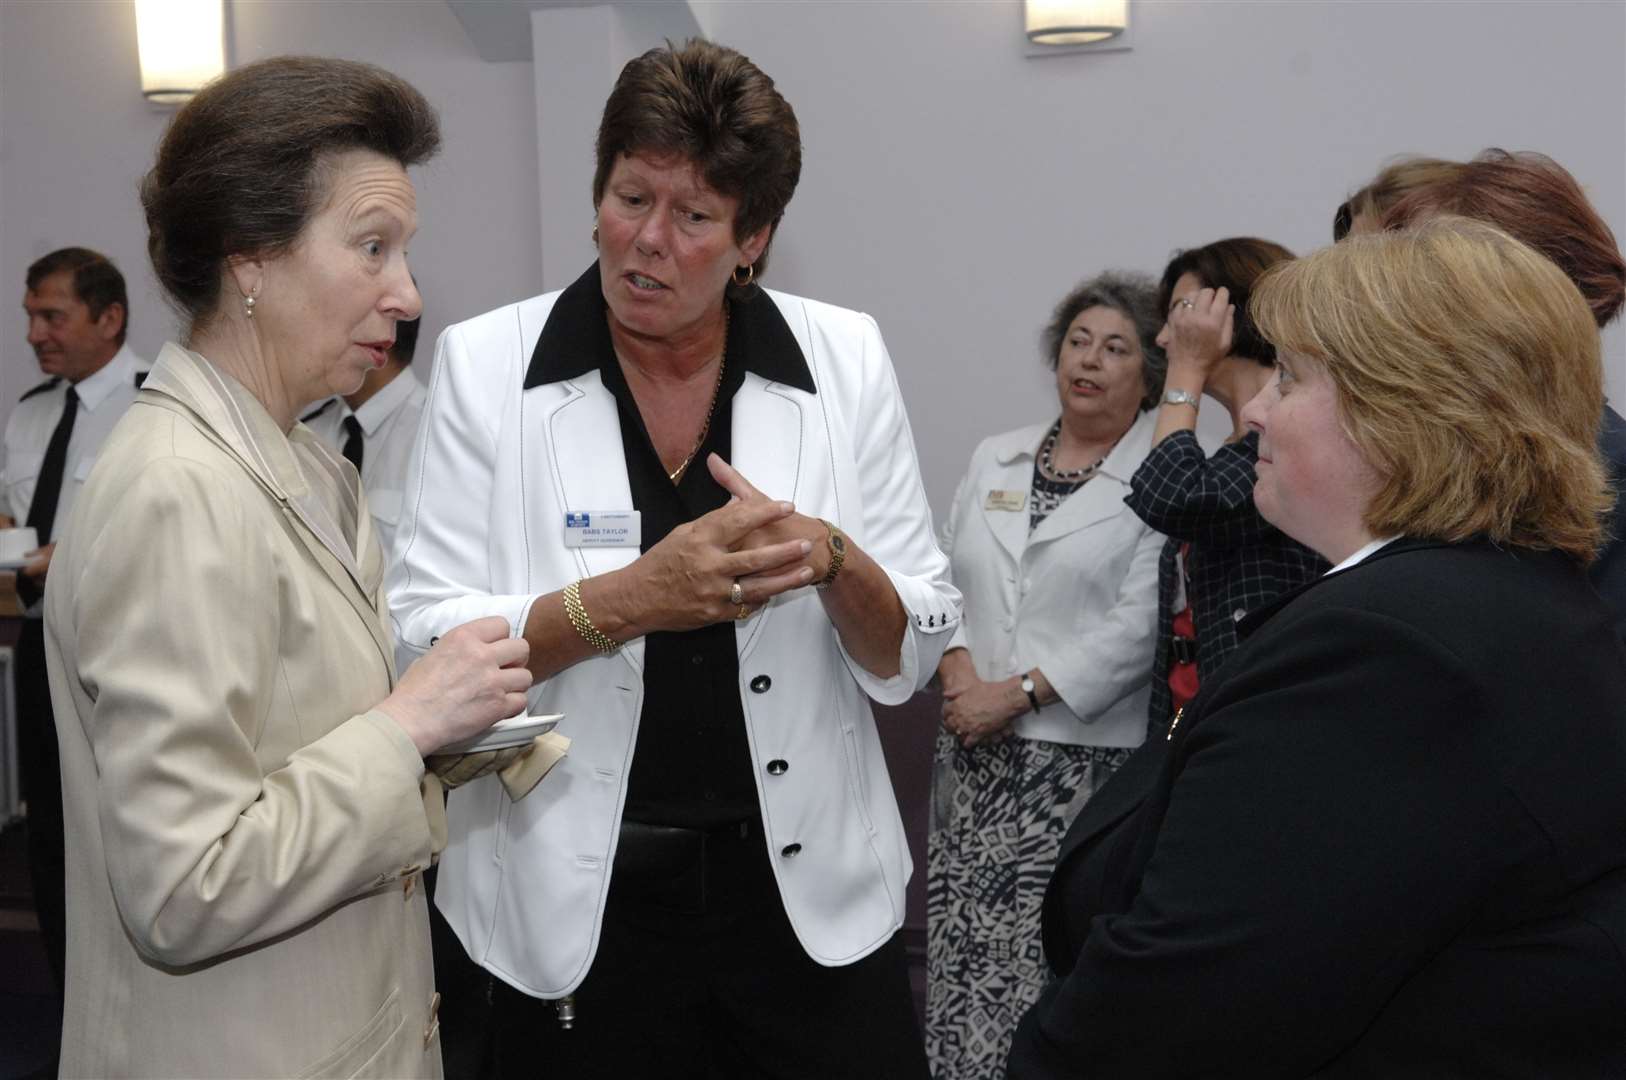 The Princess Royal meeting people during her visit to Canterbury Prison on Tuesday. Picture: Chris Davey